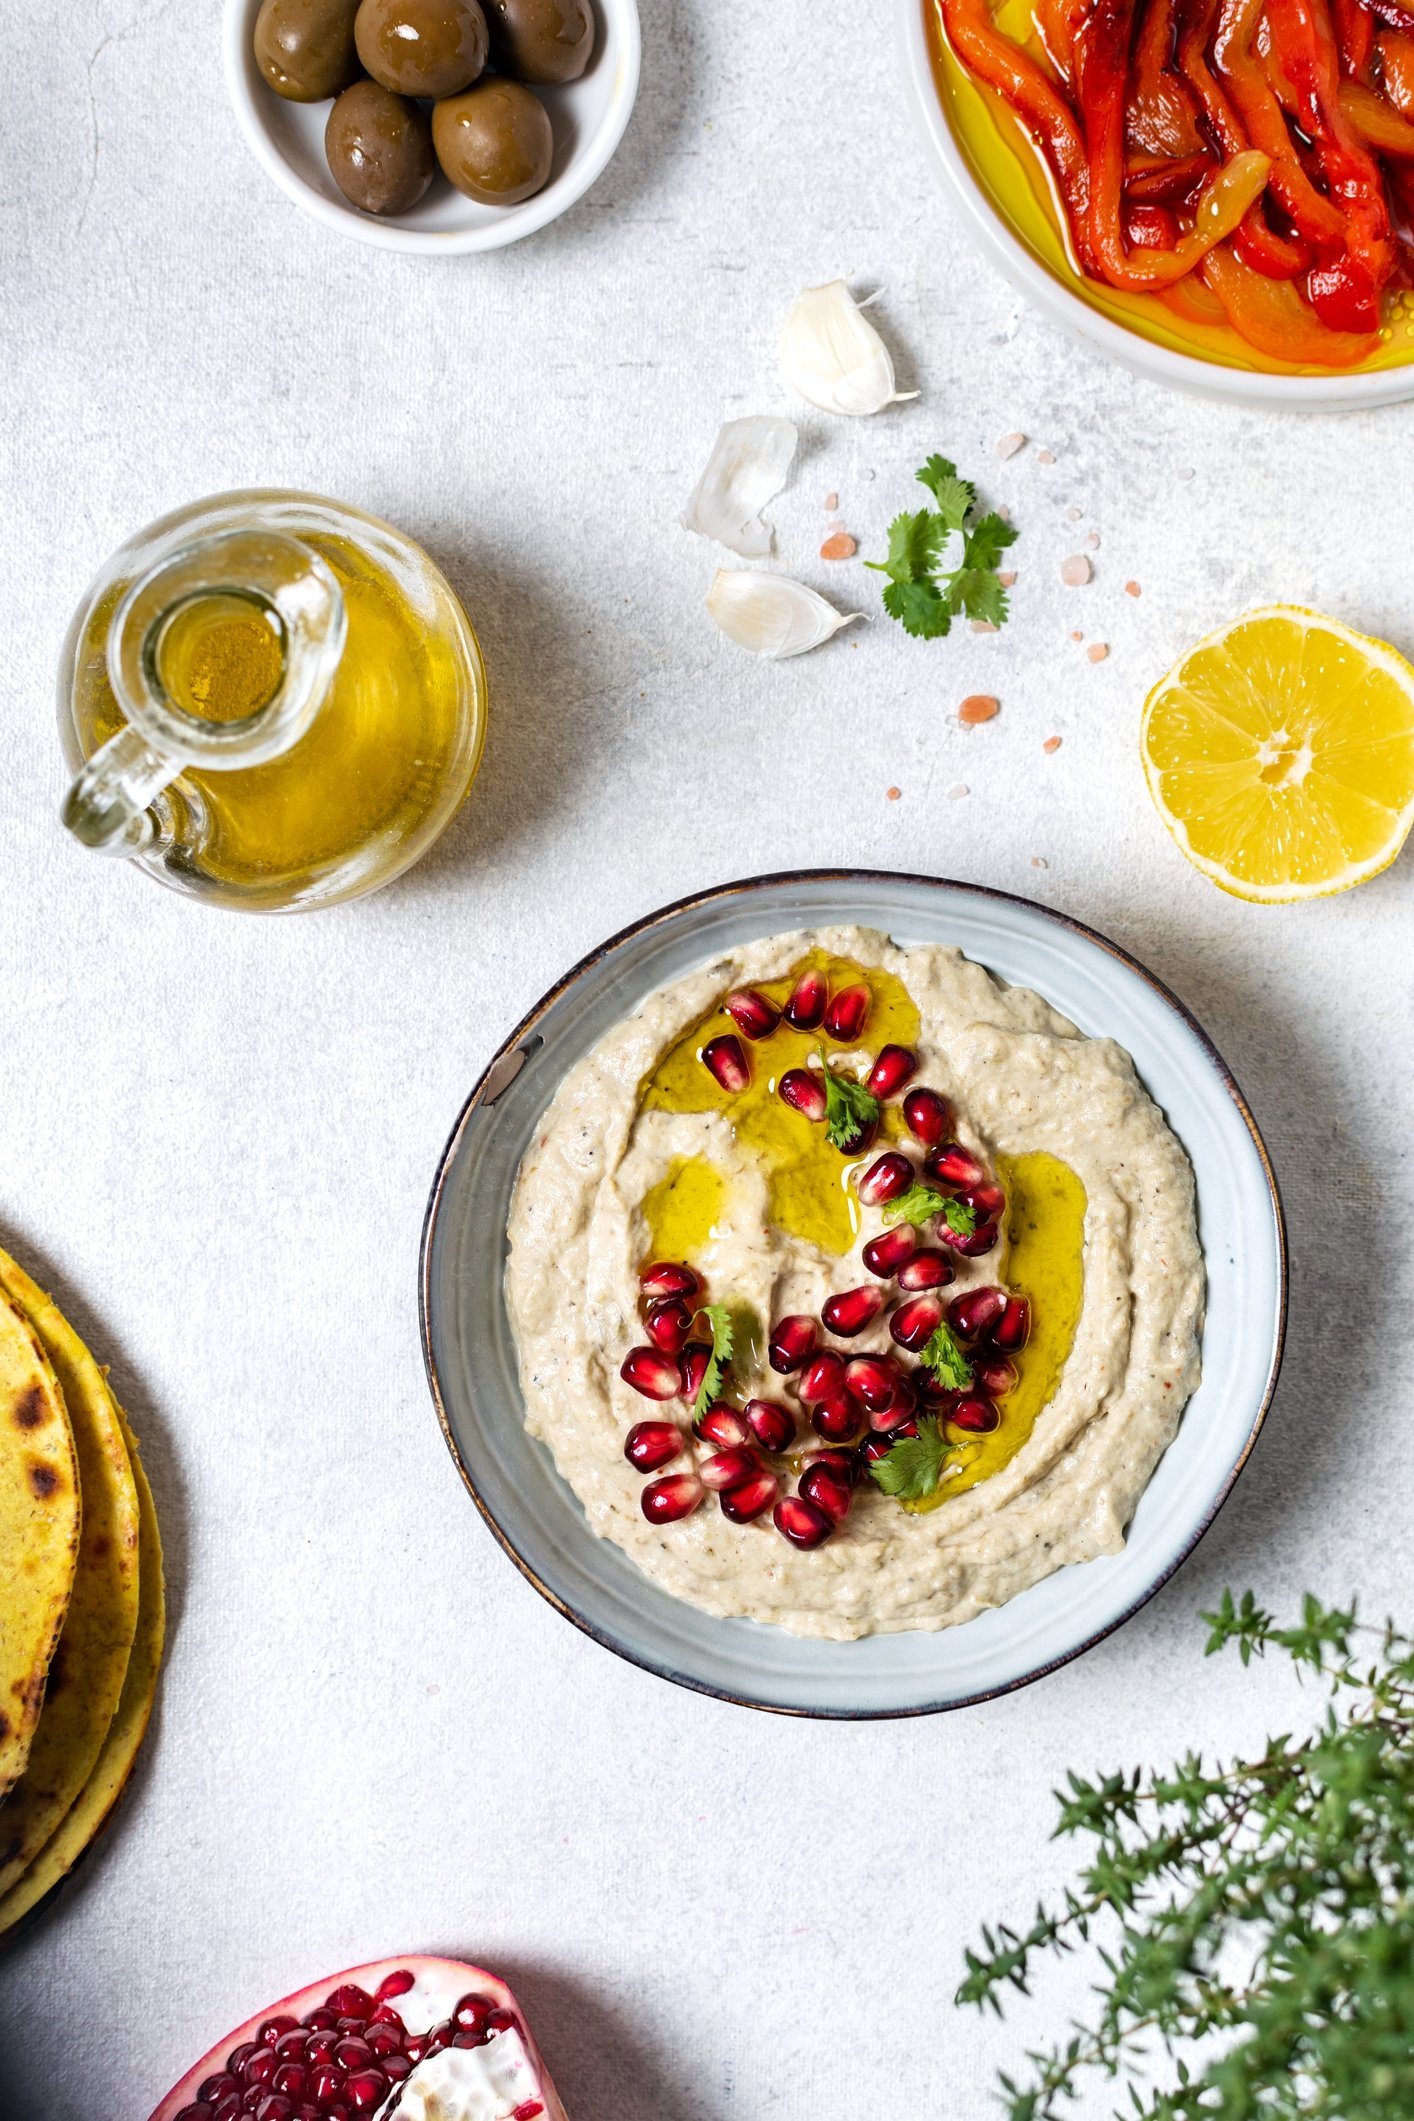 Baba ghanoush is made out of eggplant mixed with tahini, olive oil, lemon juice and spices. (iStock Photo)